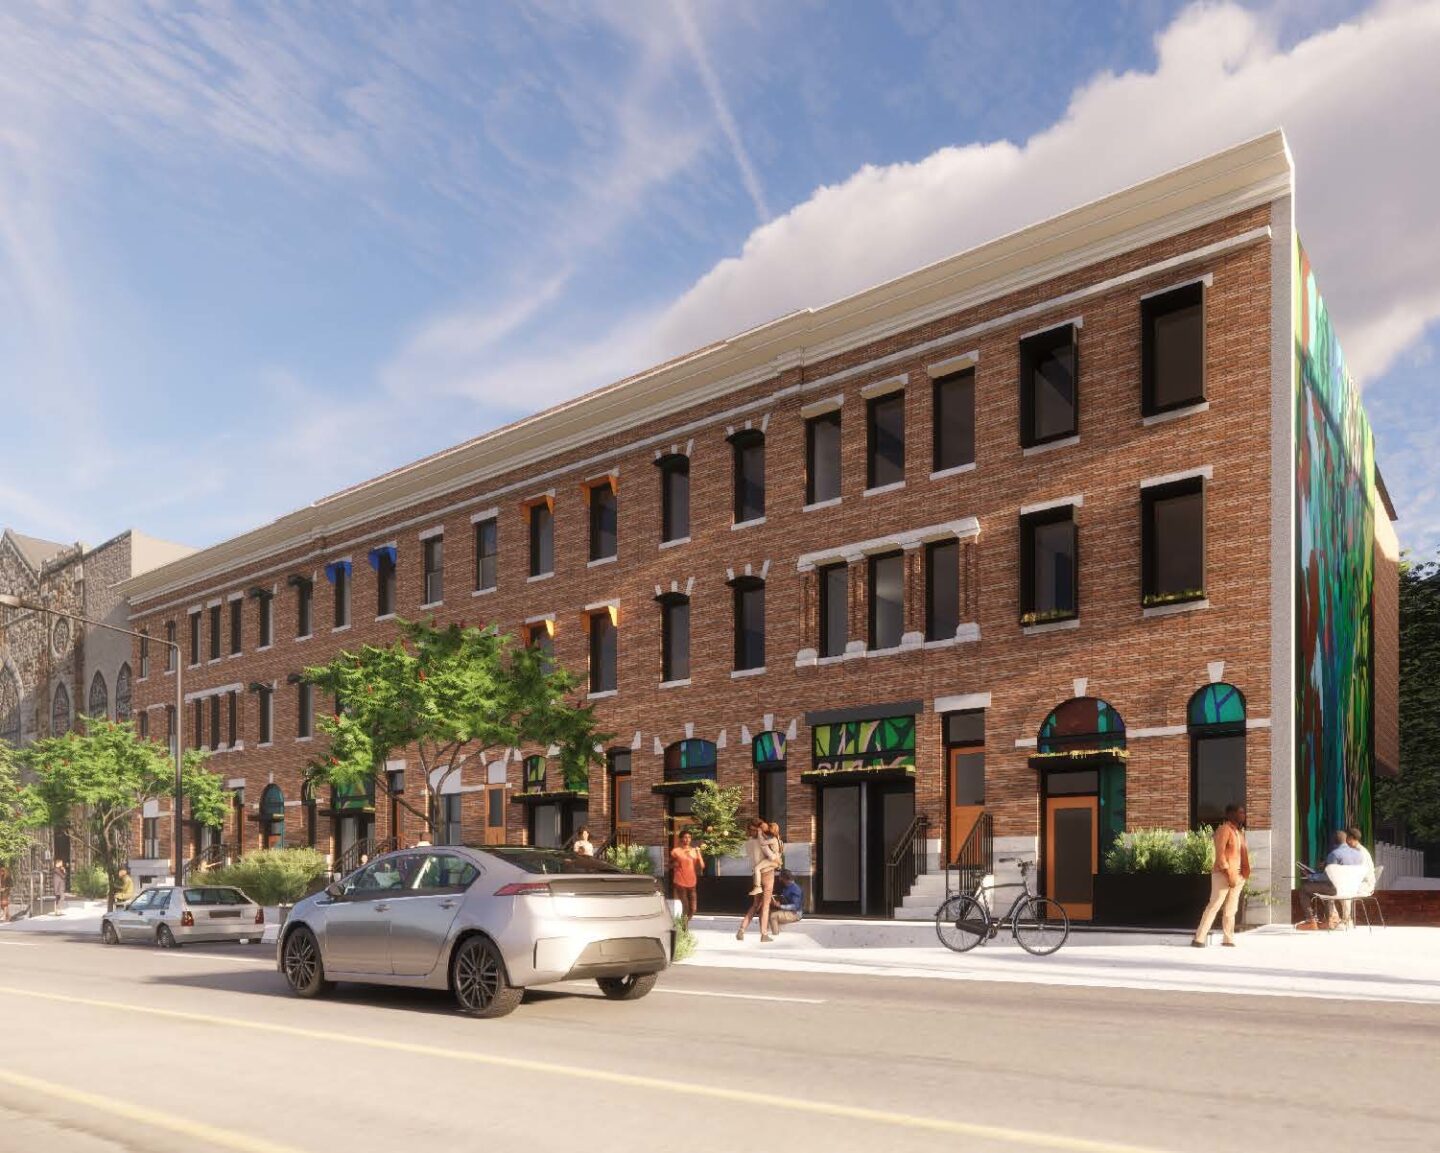 A rendering of a revitalized brick building with colorful awnings